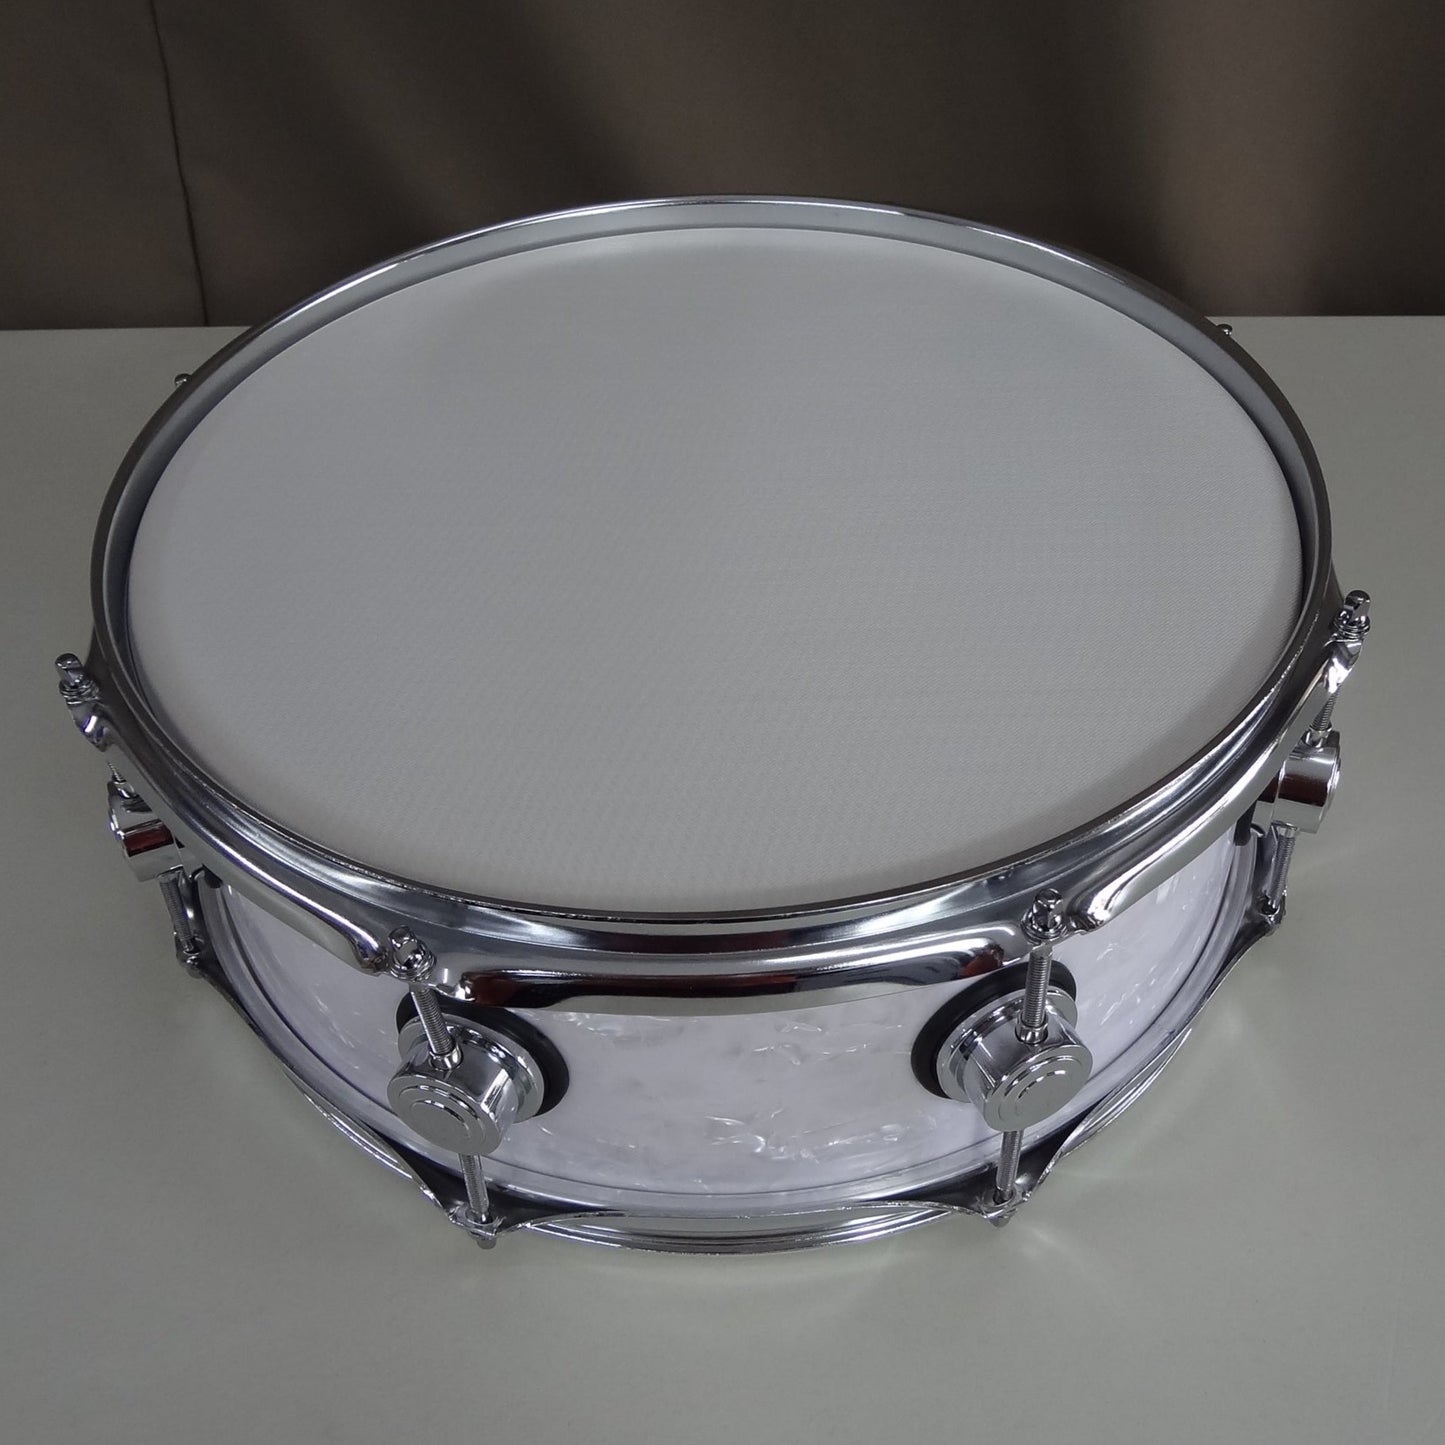 New 14 Inch Custom Electronic Snare Drum - White Pearl